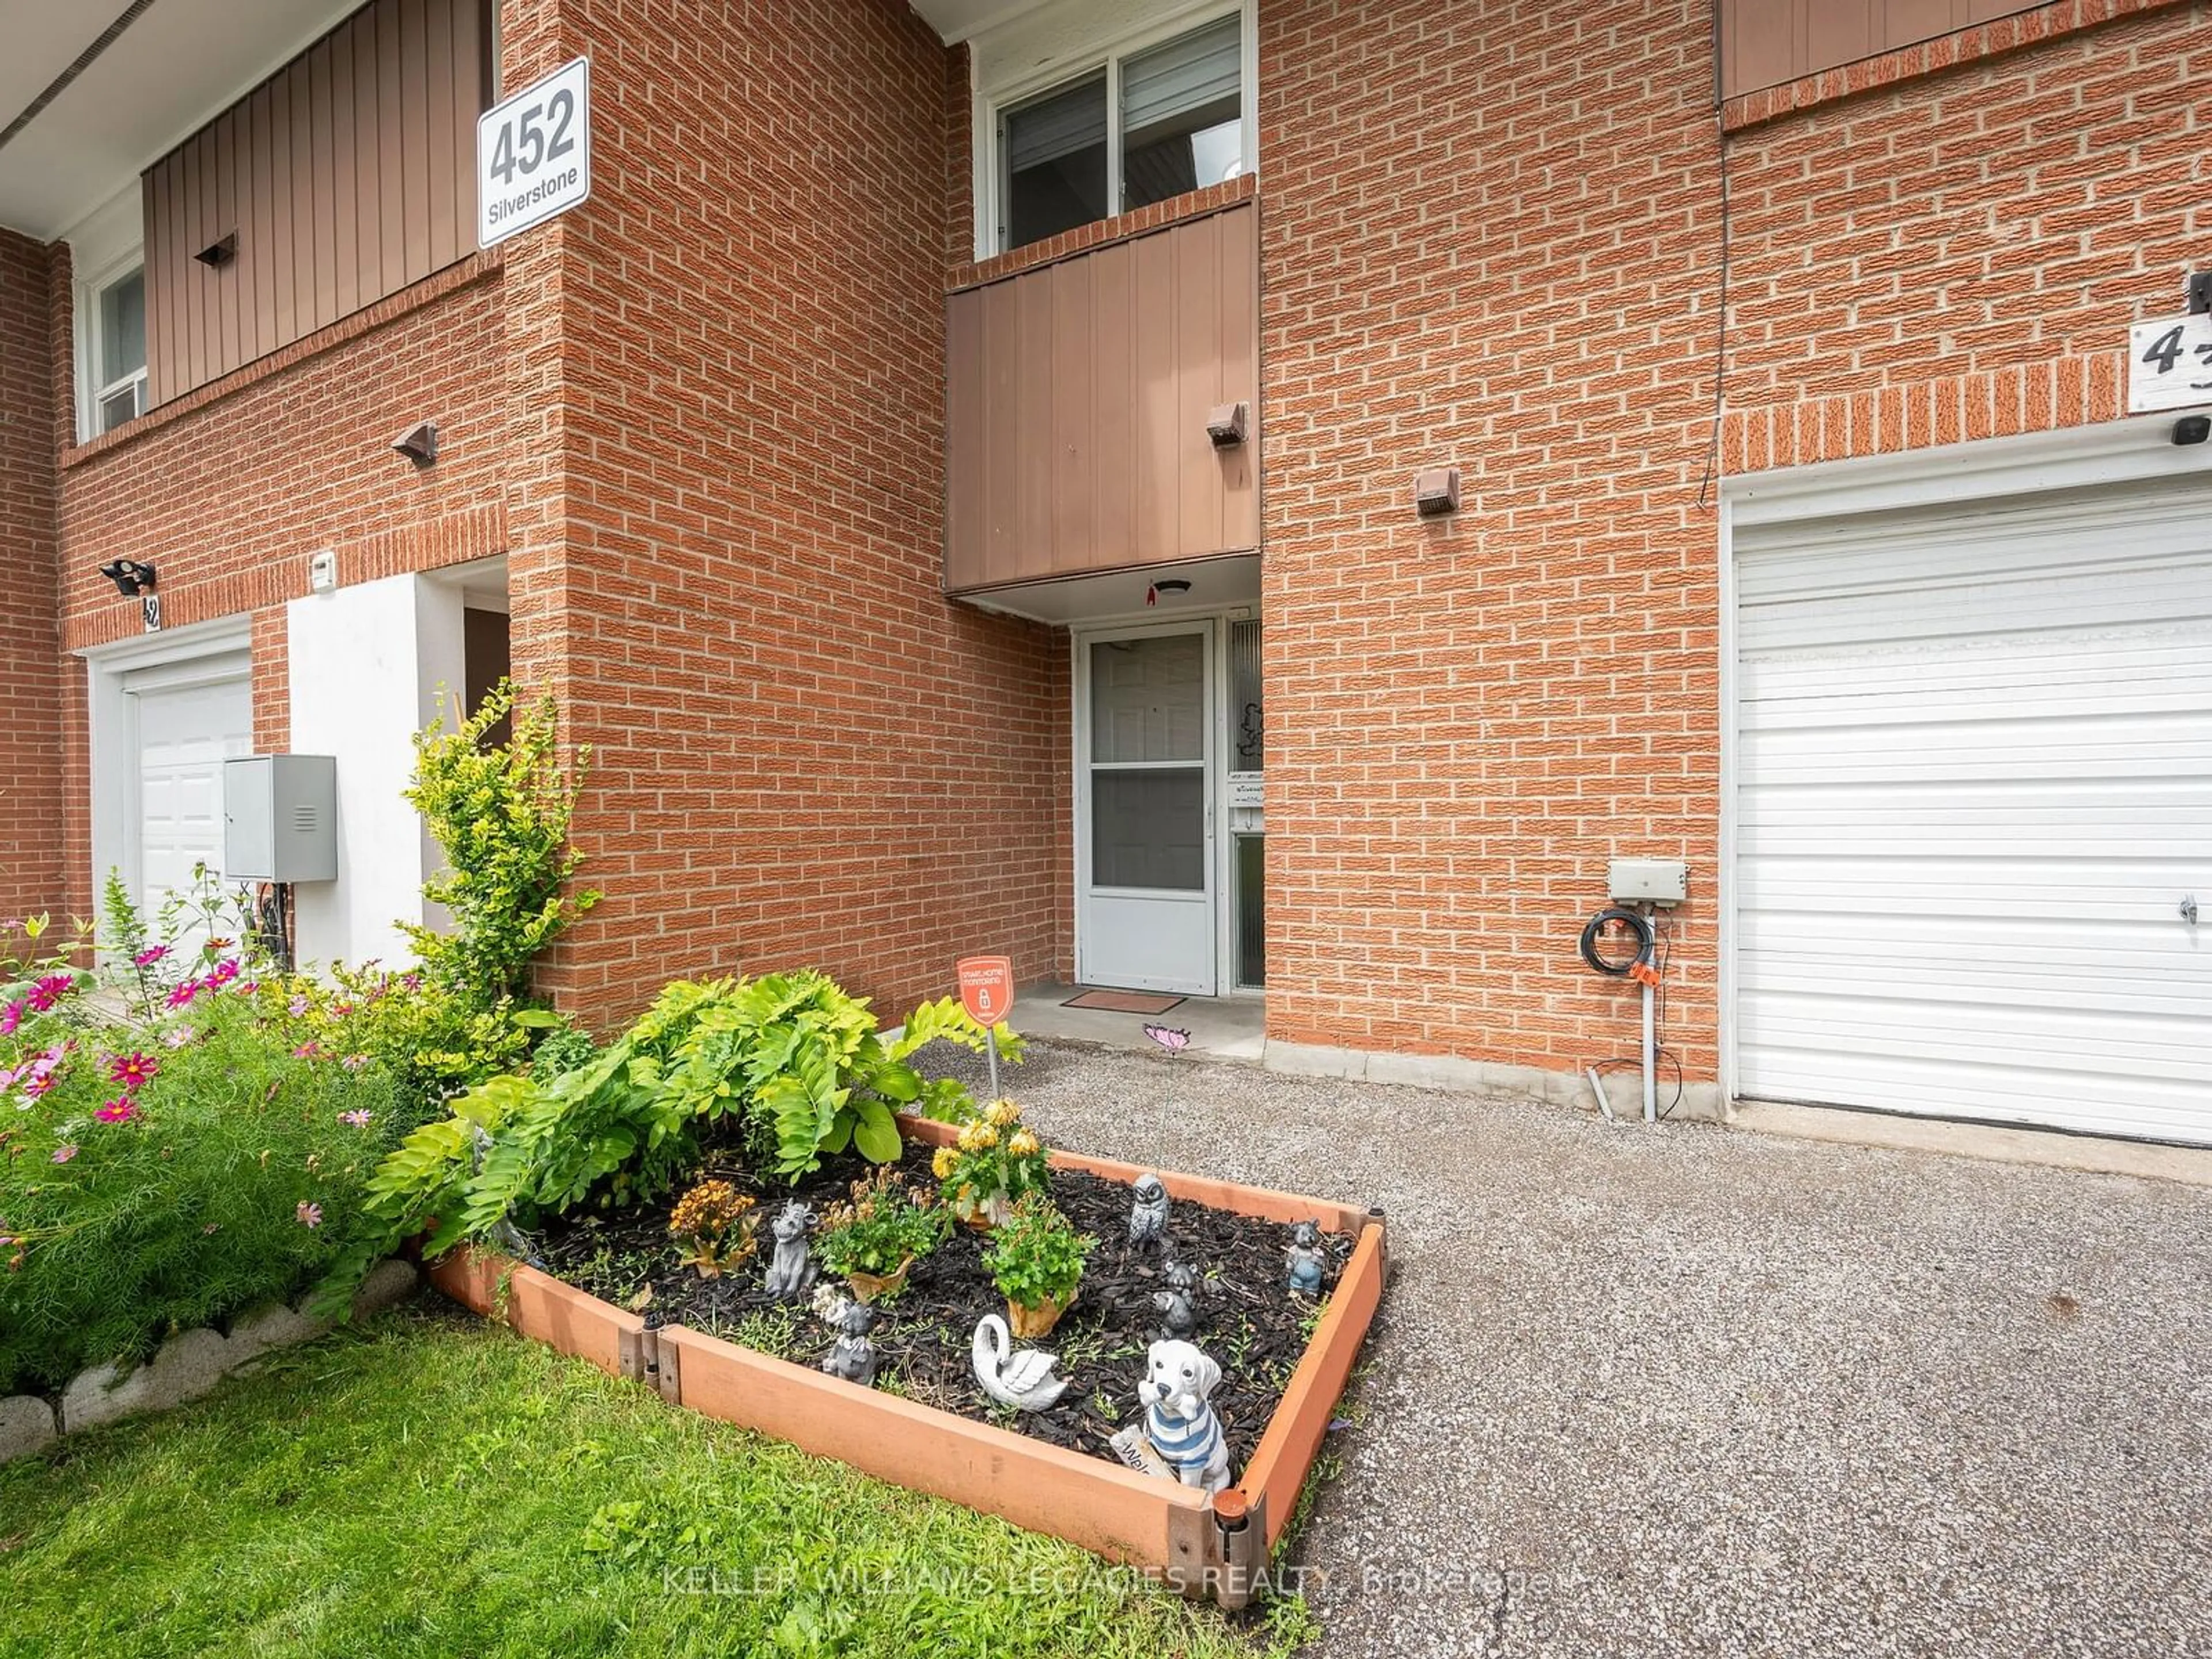 A pic from exterior of the house or condo for 452 Silverstone Dr #43, Toronto Ontario M9V 3K8